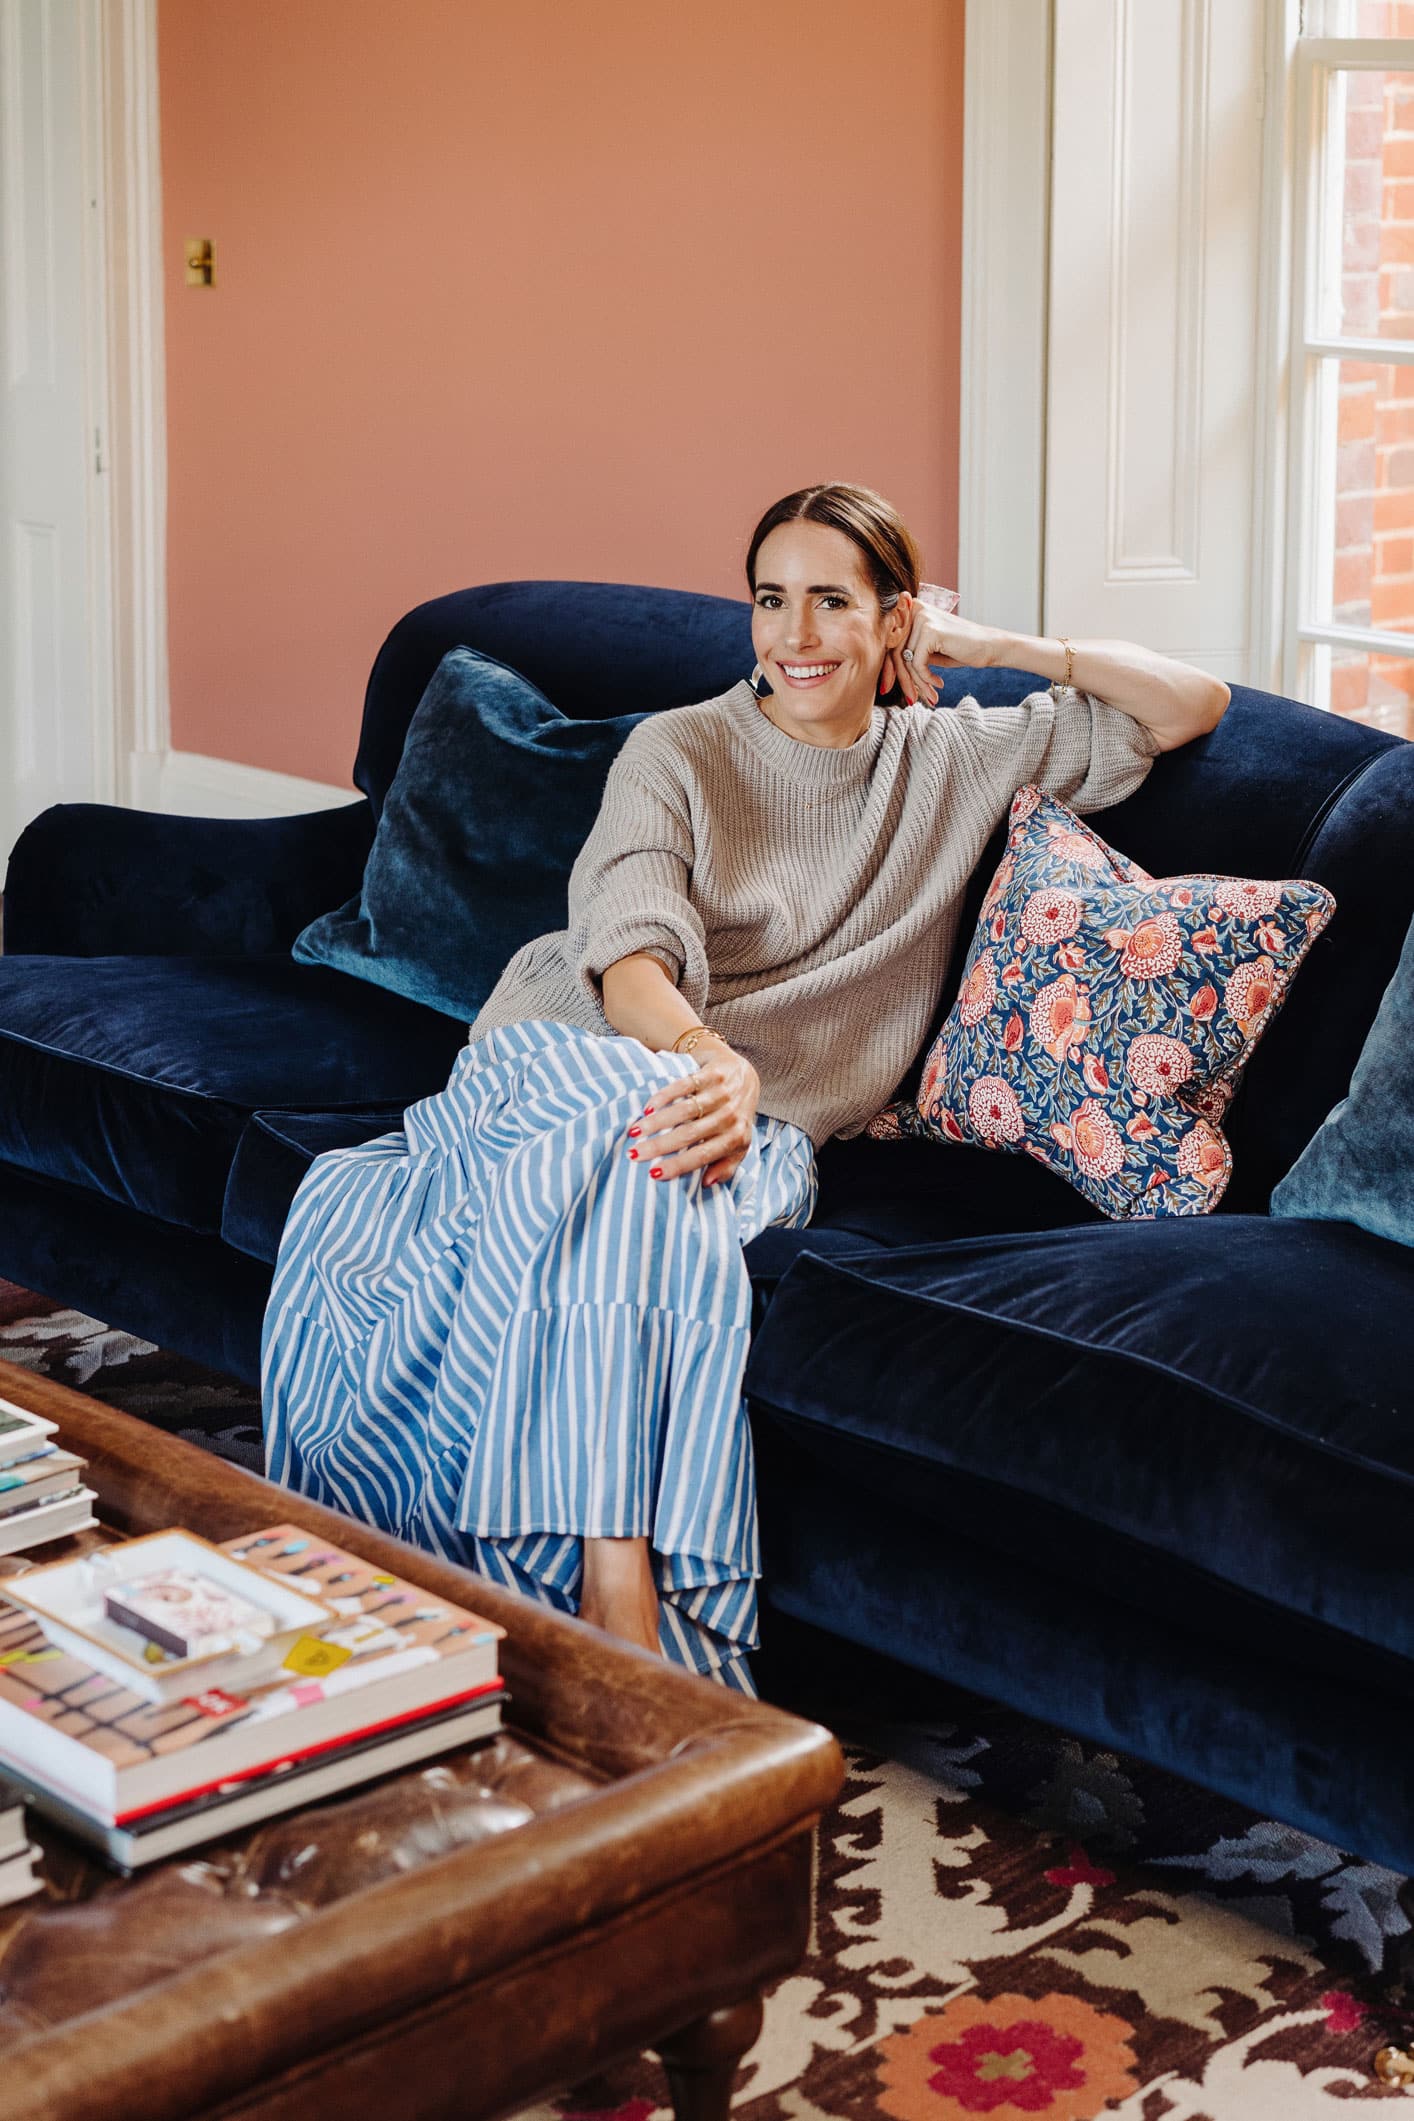 Louise Roe reveals her new Drawing Room